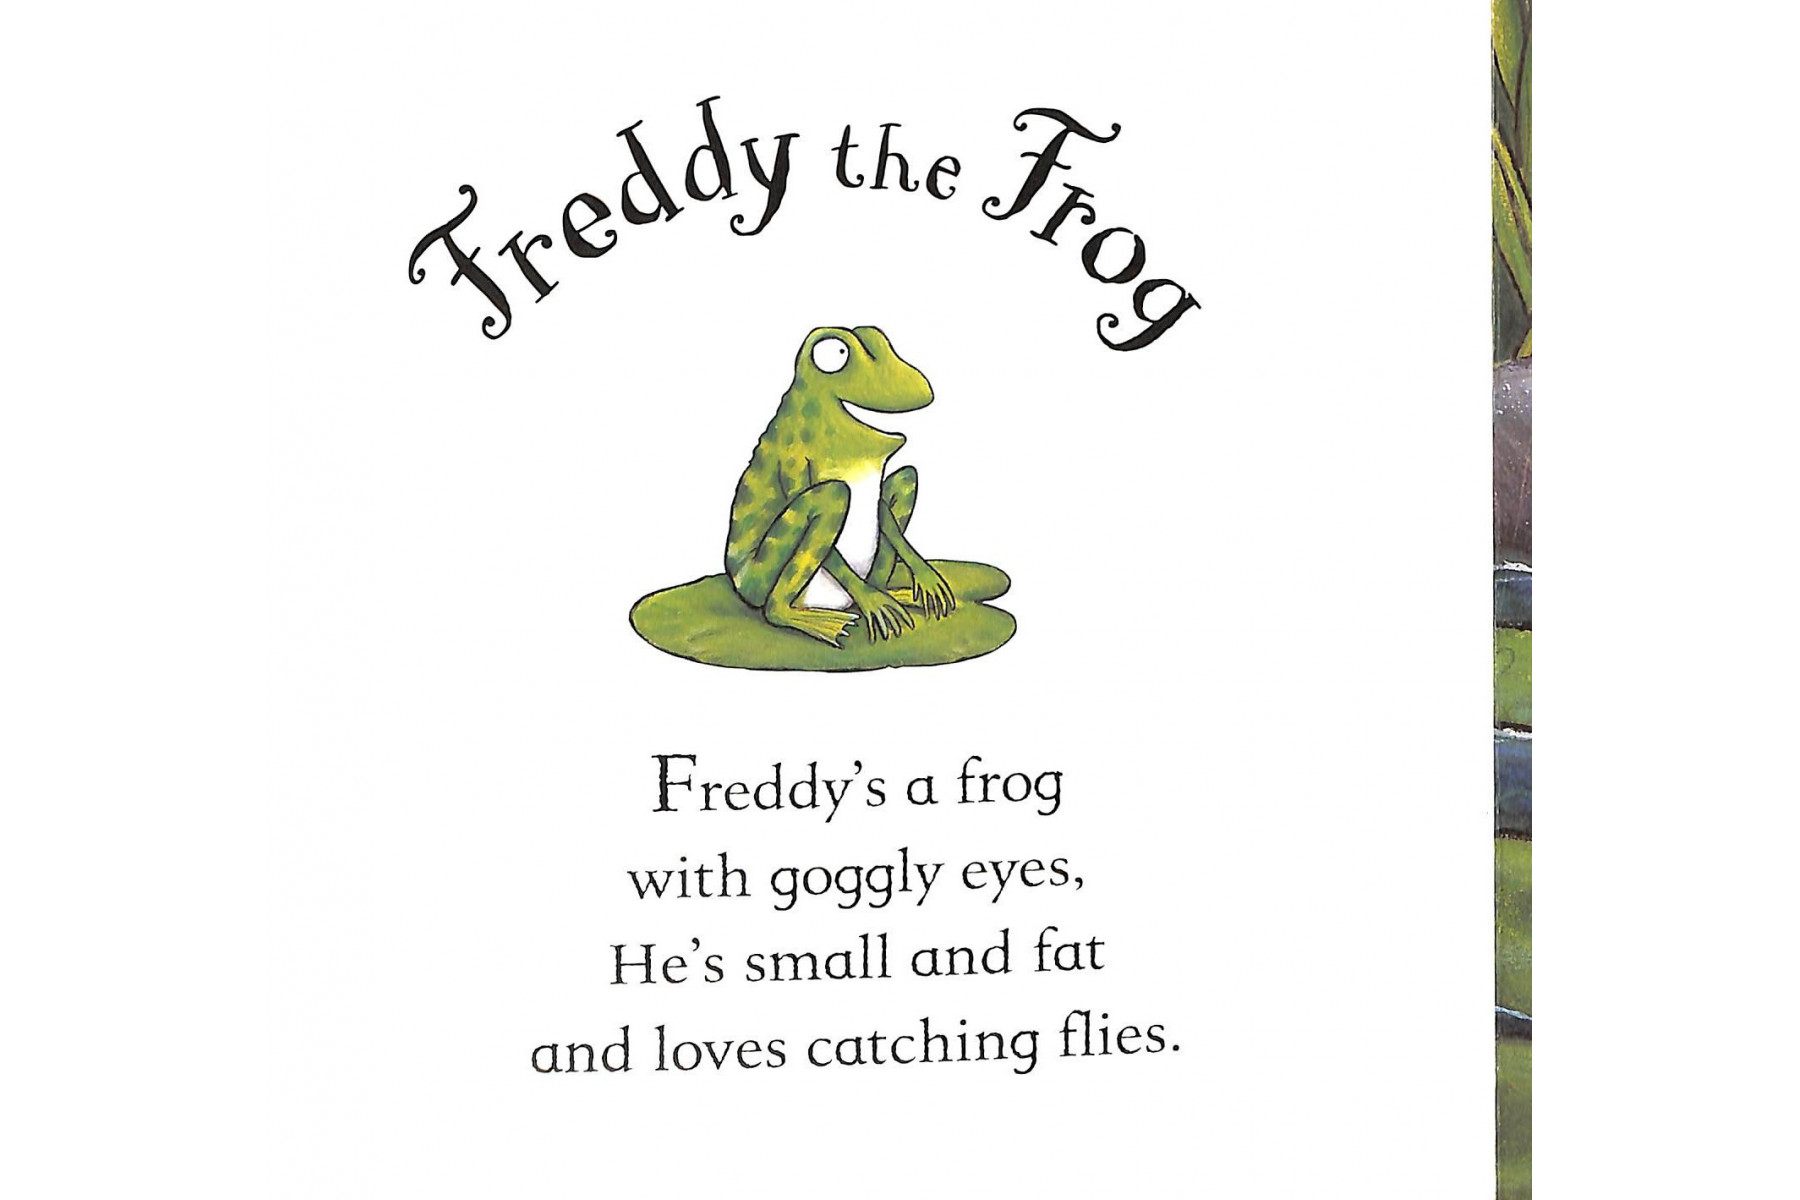 Pip the Dog and Freddy the Frog